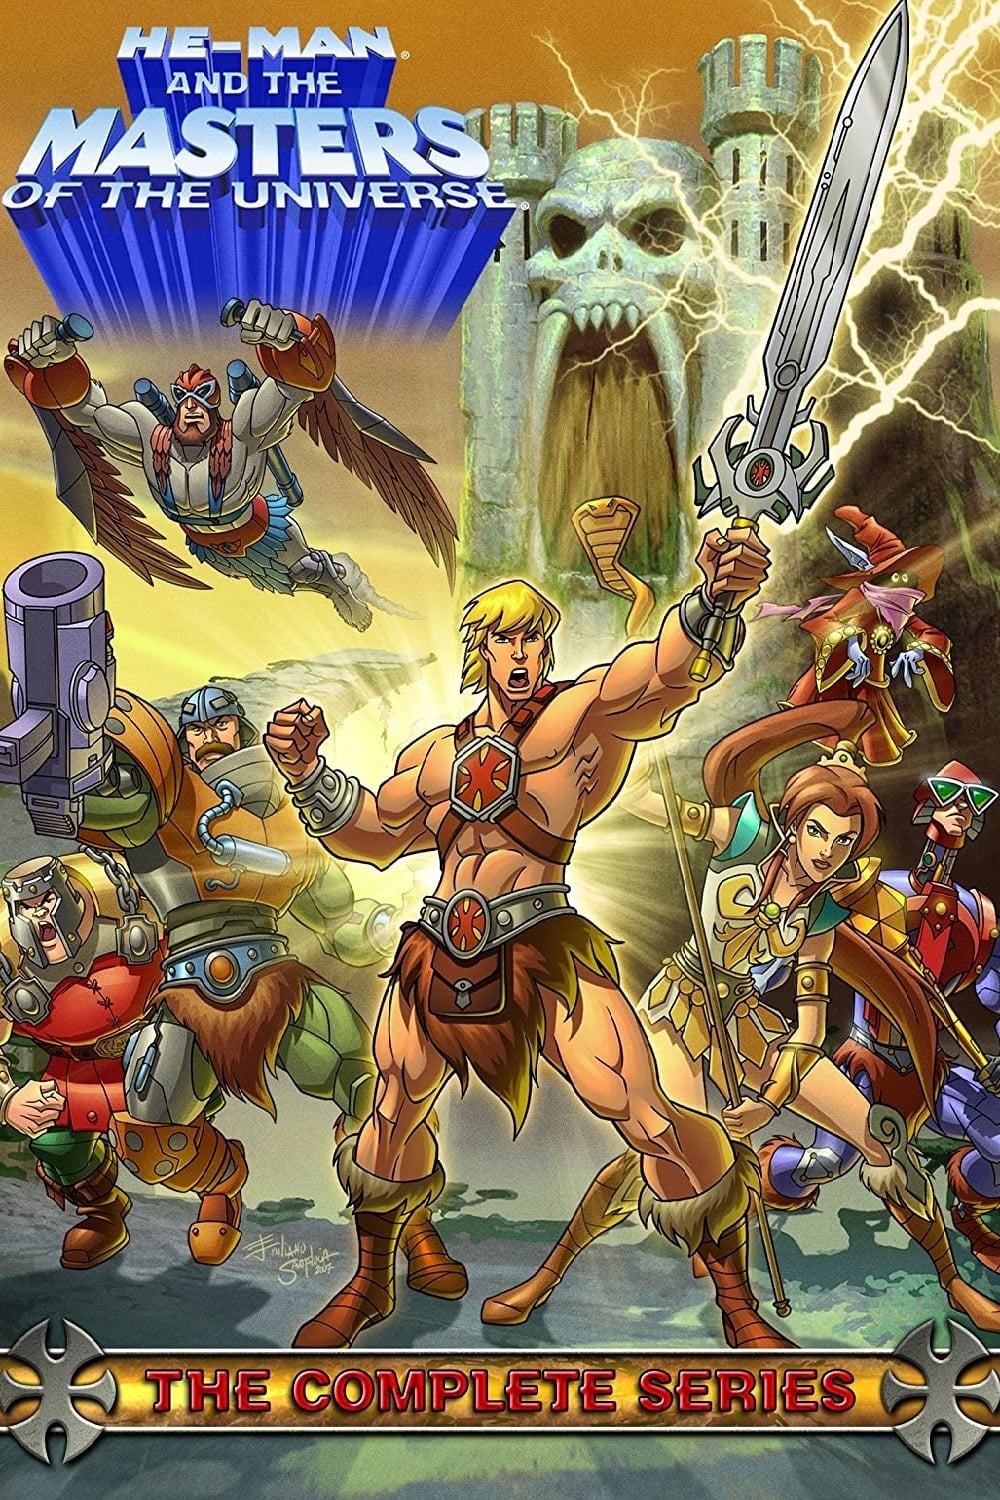 He-Man and the Masters of the Universe TV Shows About Alien Planet